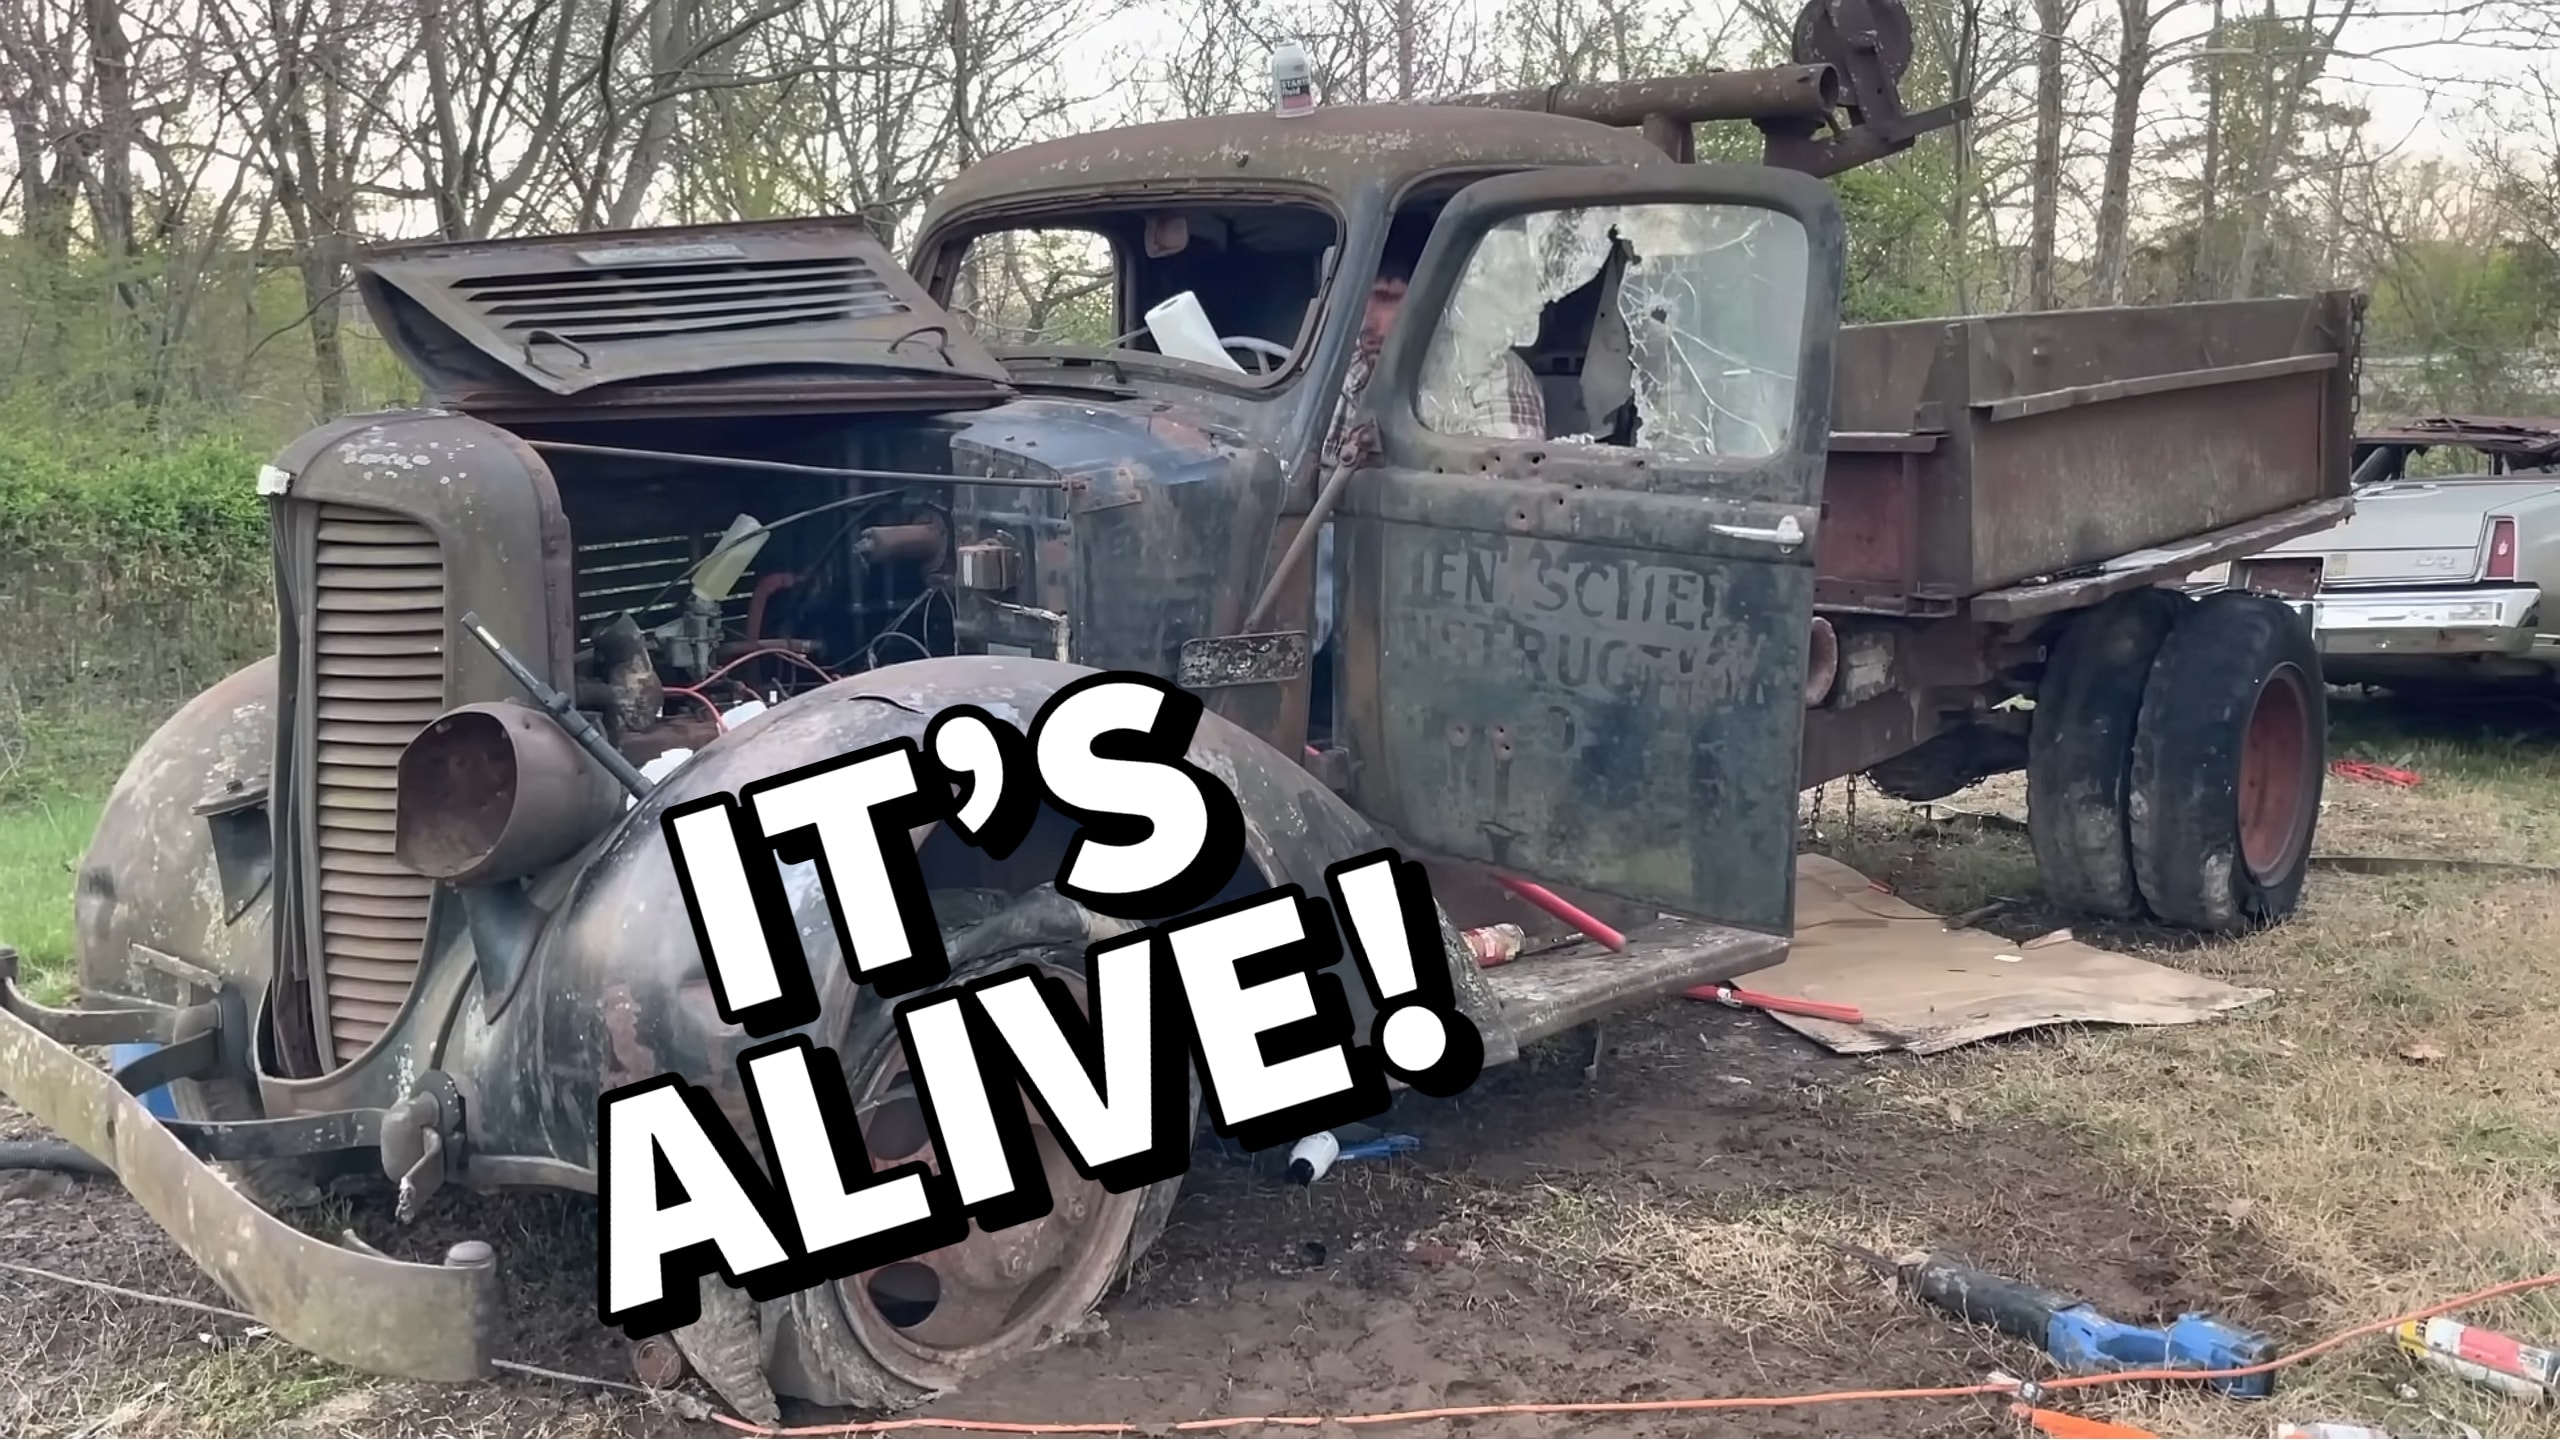 1938 Dodge Truck Abandoned for 50 Years Gets Second Chance, Engine Agrees To Run